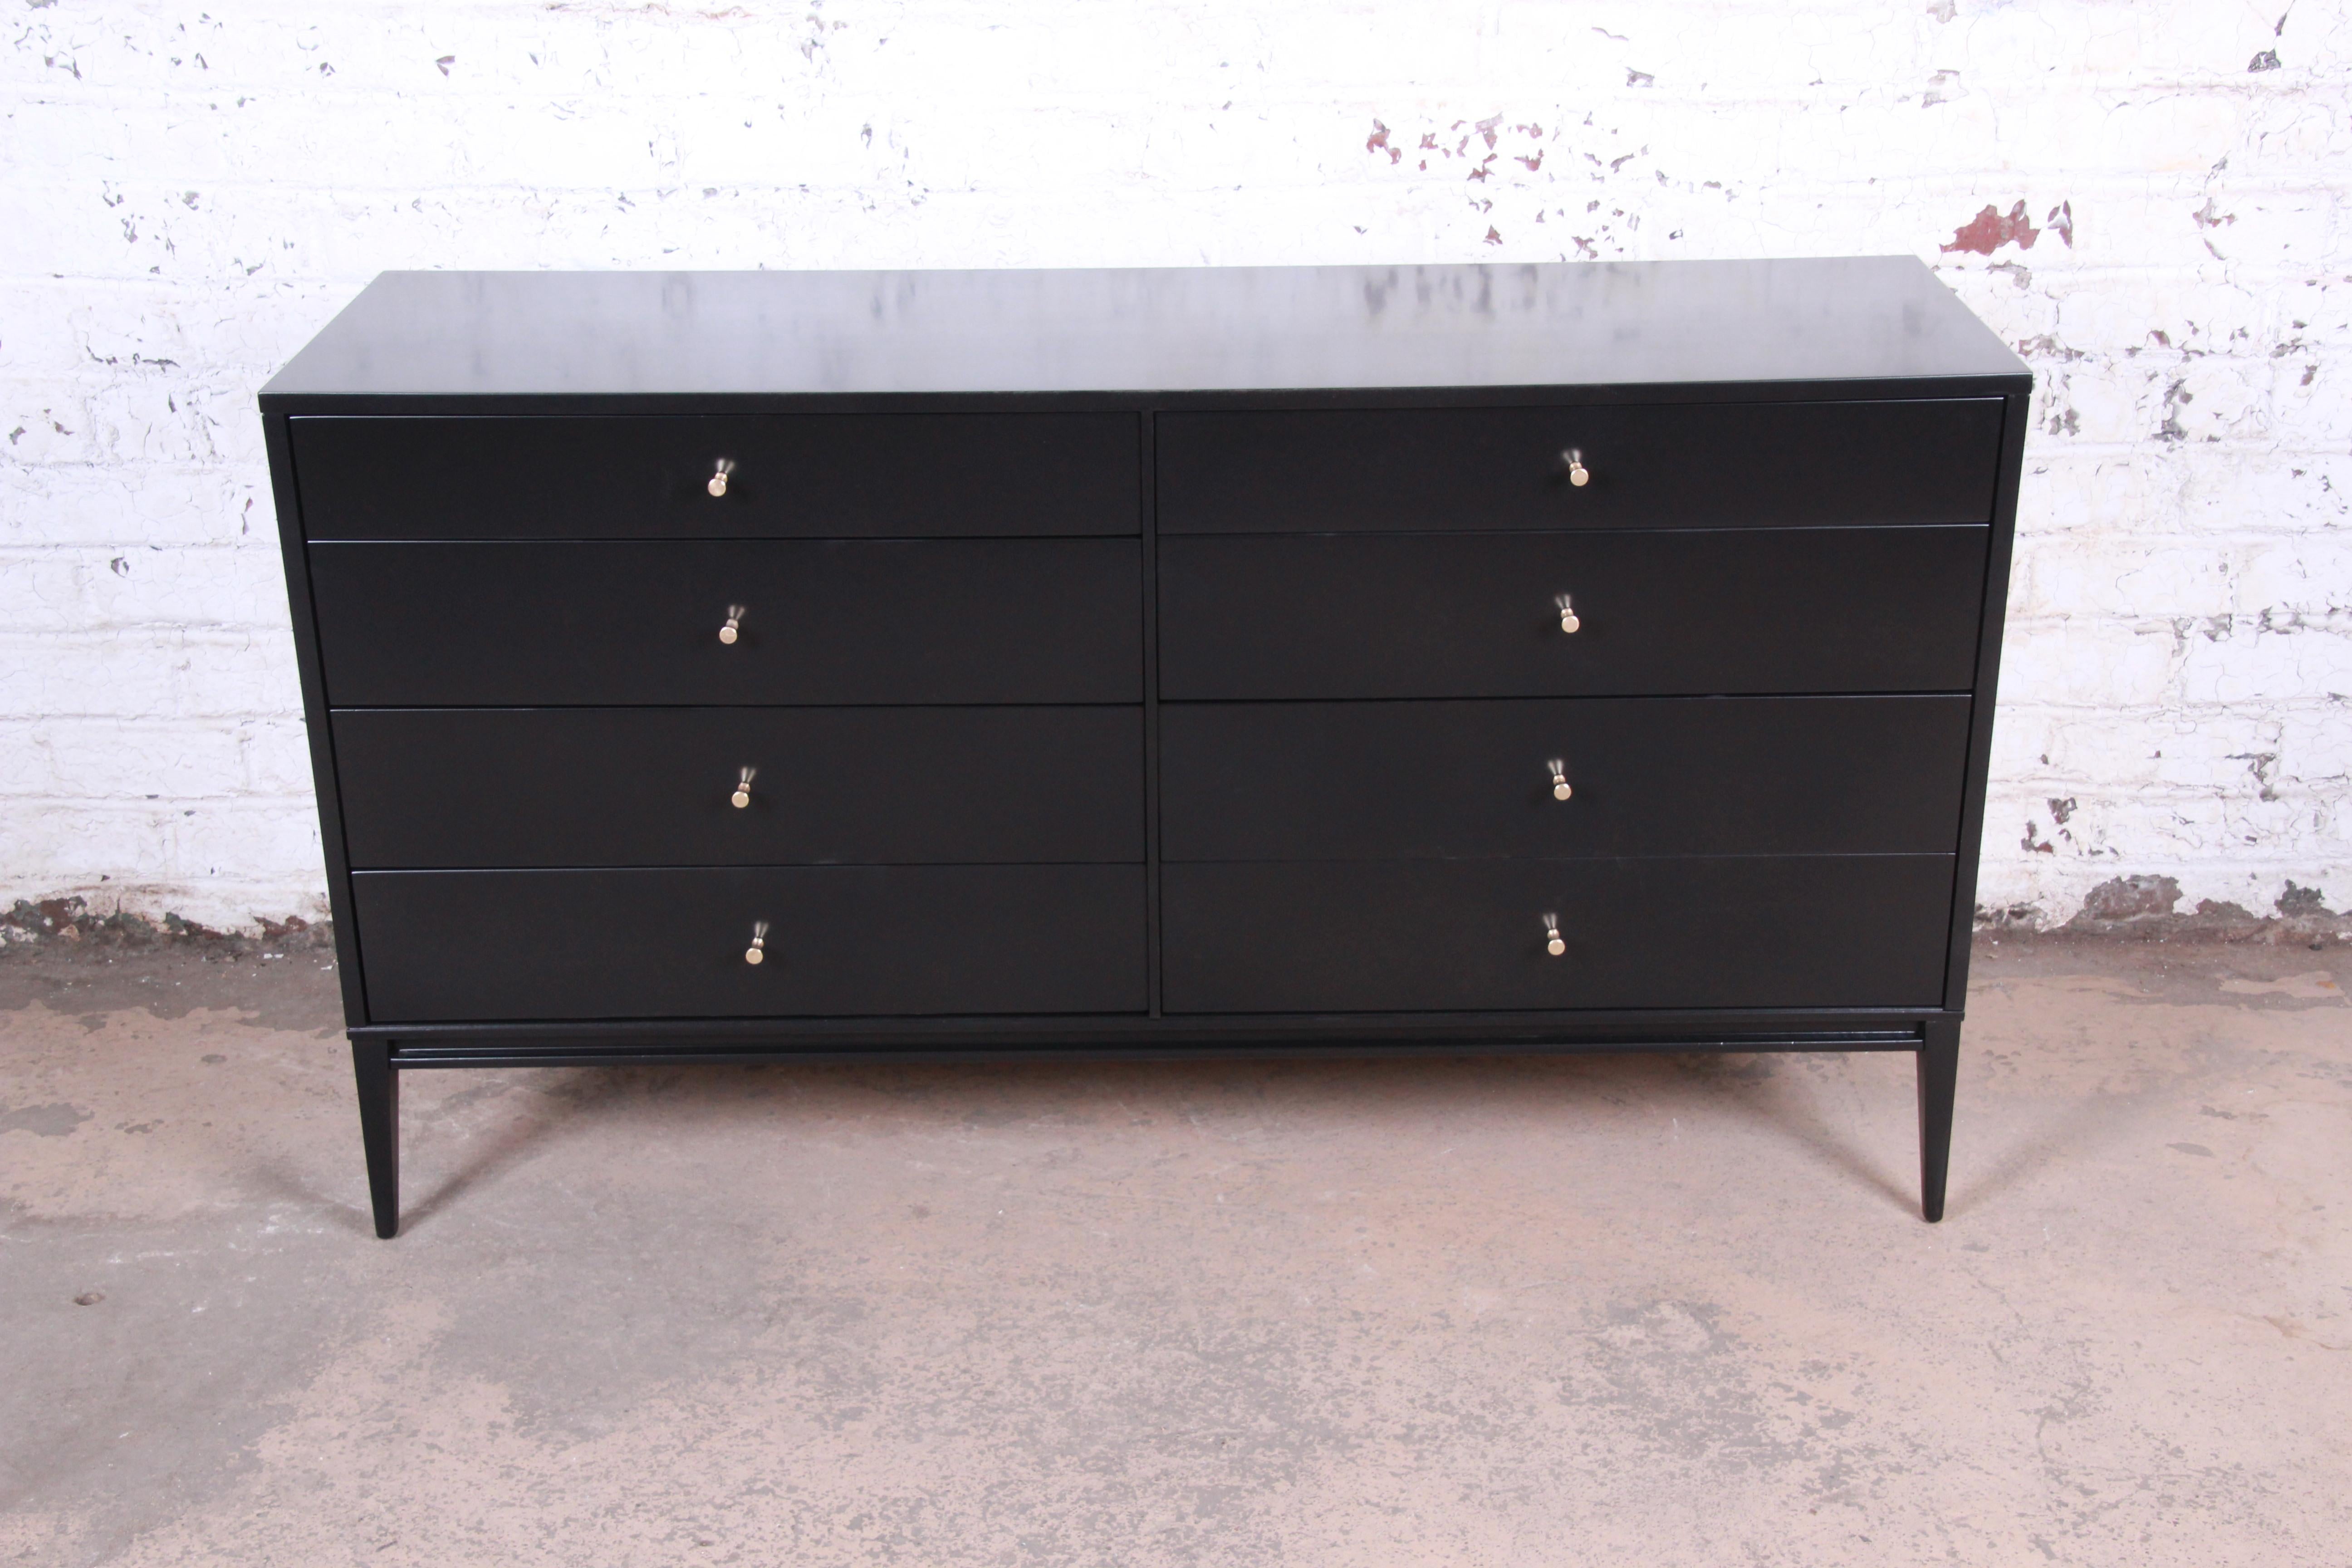 An exceptional Mid-Century Modern eight-drawer dresser or credenza

Designed by Paul McCobb for Winchendon Furniture 